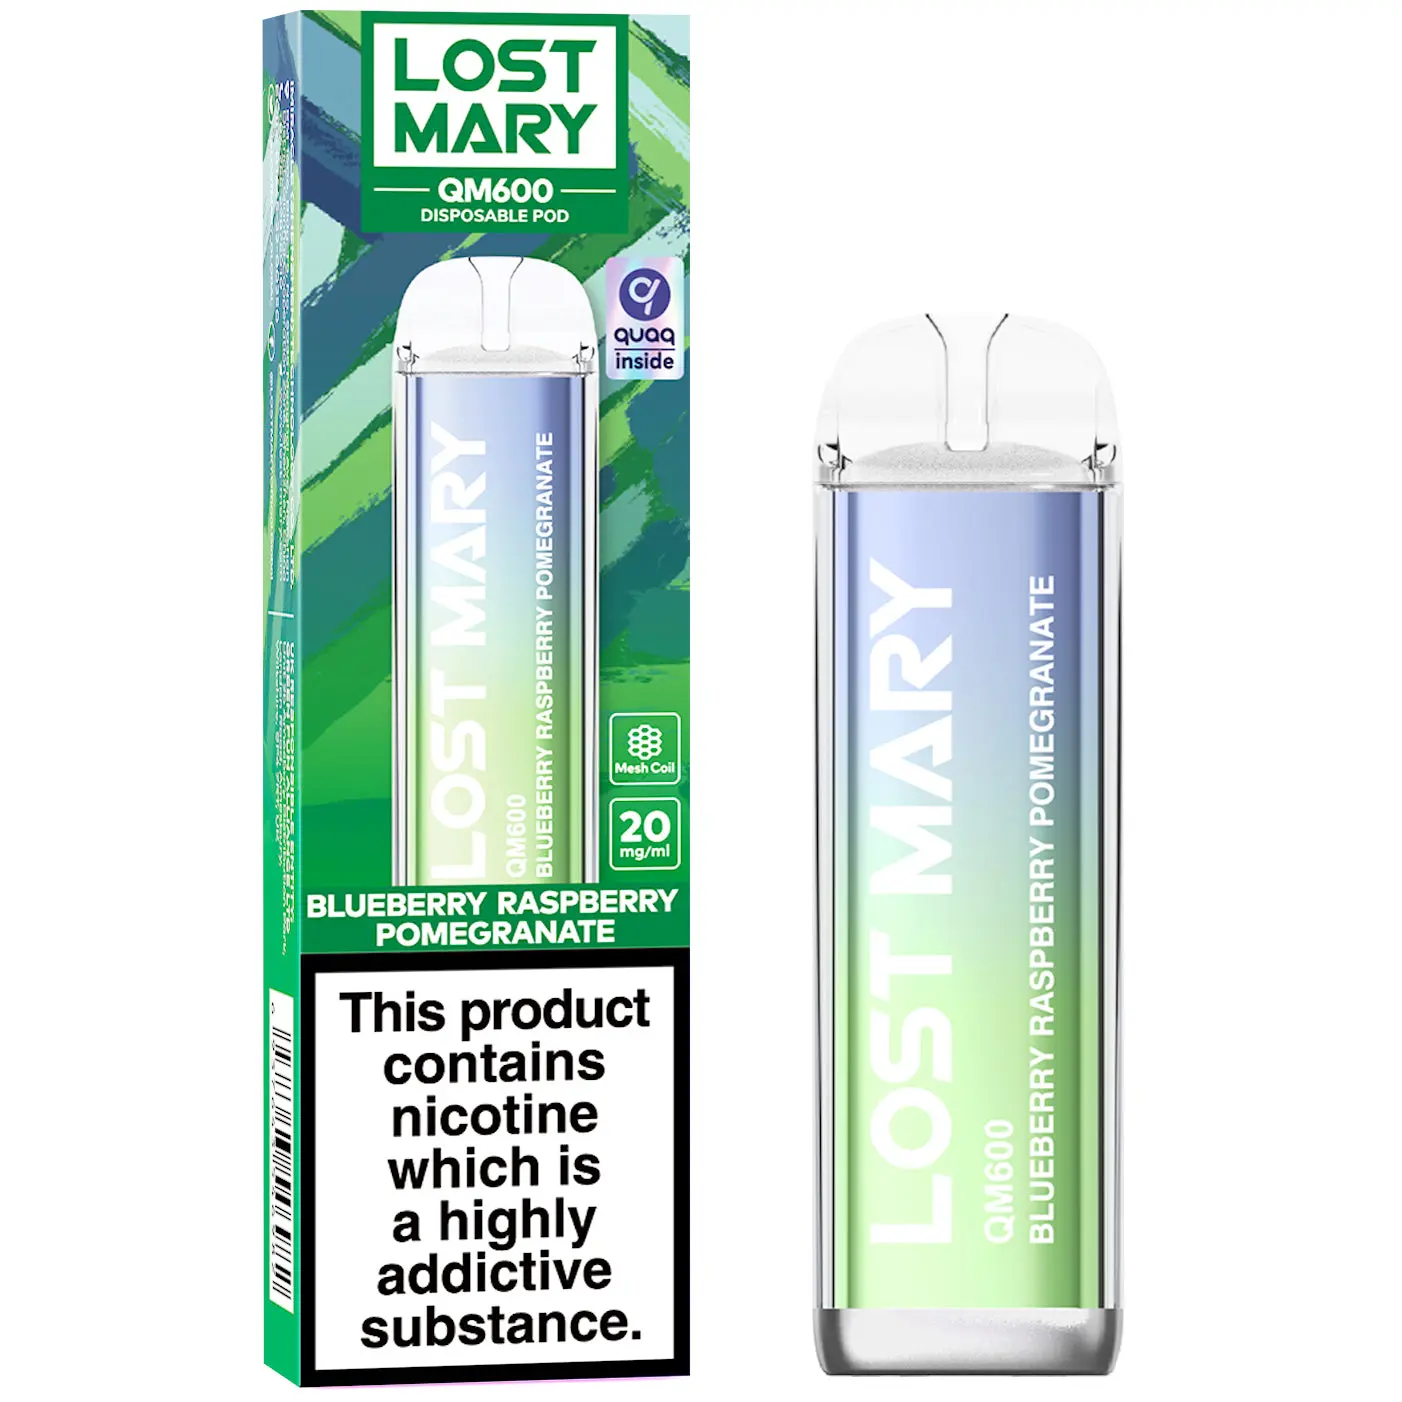  Lost Mary QM600 By Elf Bar Disposable Pod Device - 20mg 